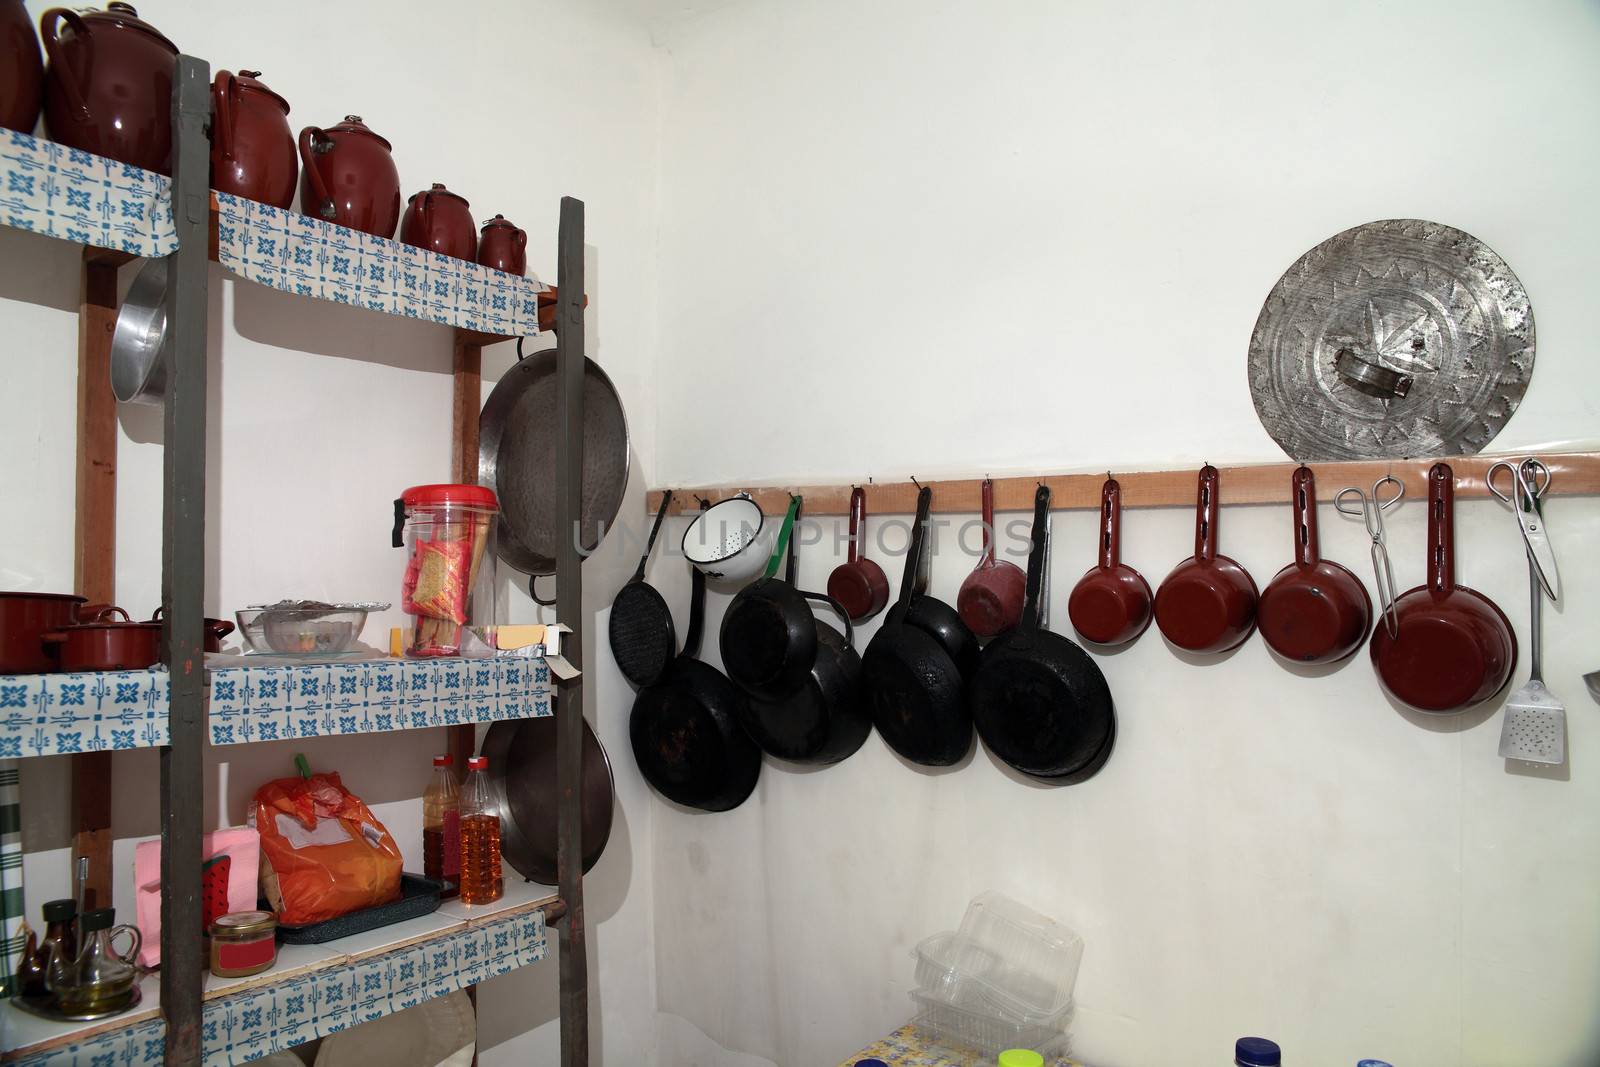 picture of an old kitchen utensils